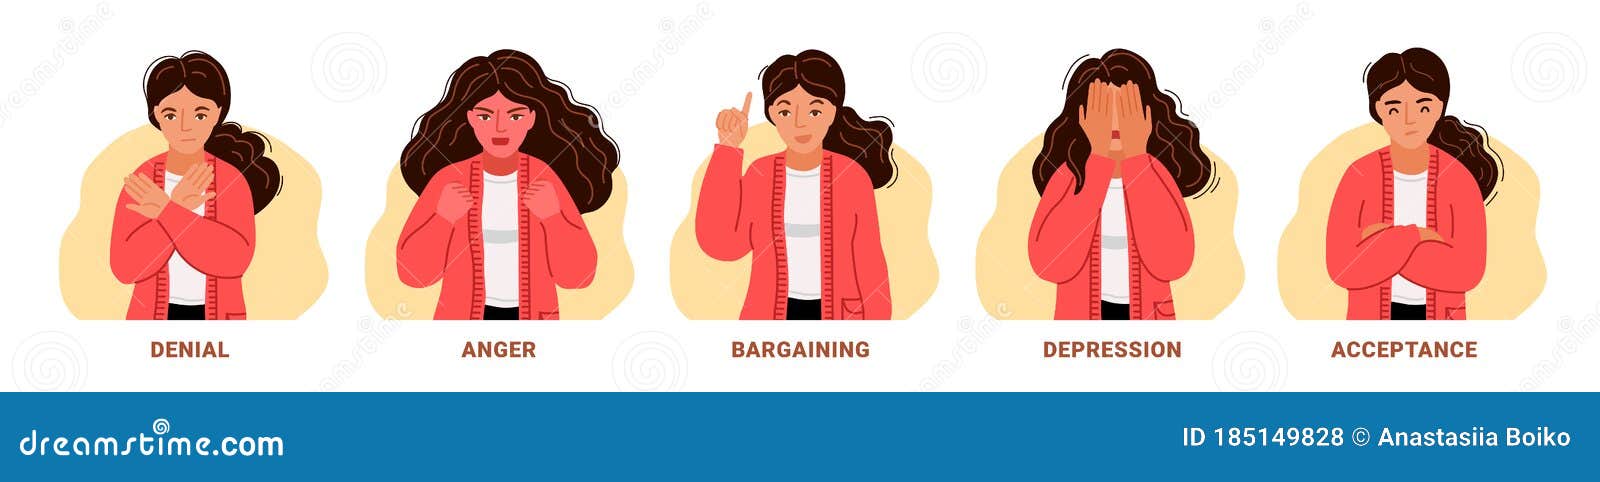 denial-anger-bargaining-depression-acceptance-woman-expressing-different-negative-emotions-stages-accepting-inevitable-sad-185149828.jpg